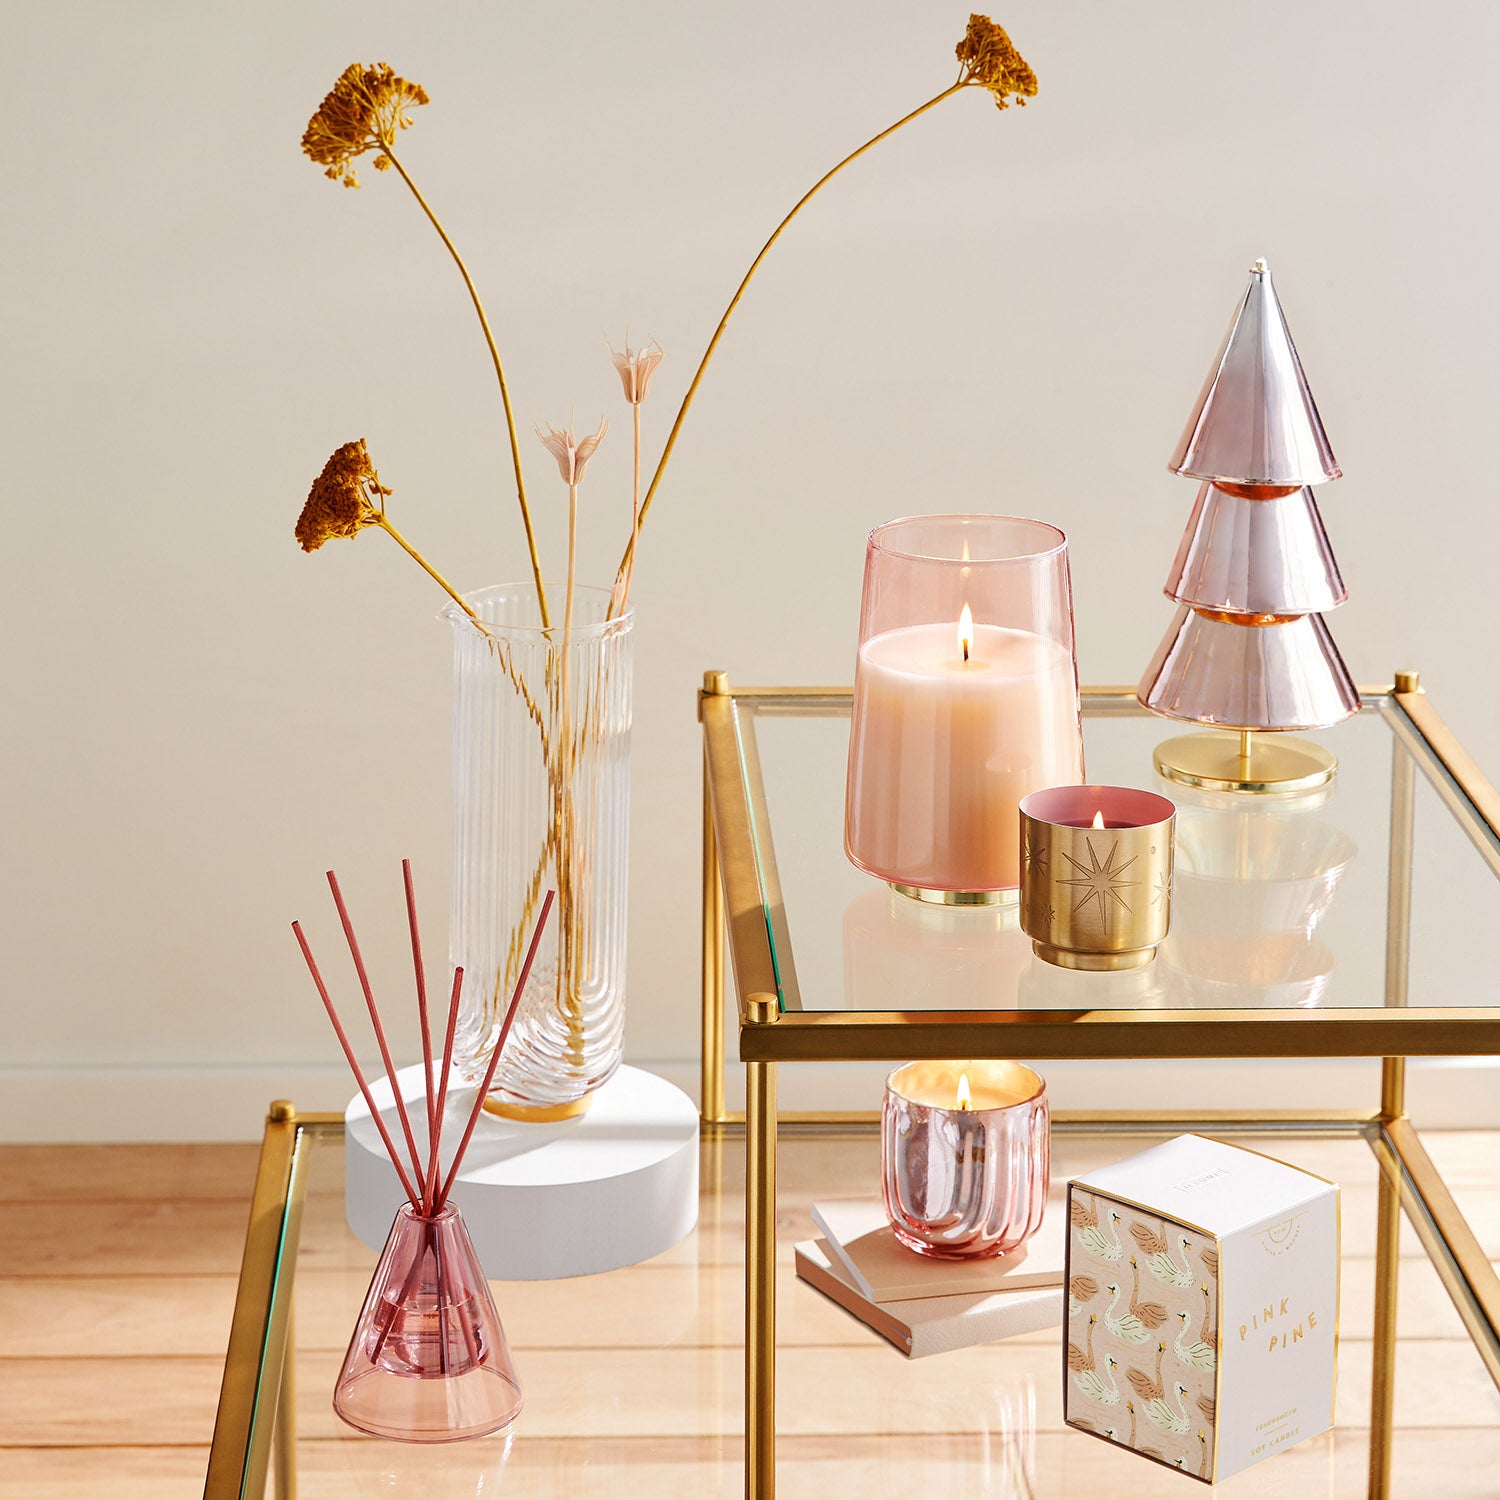 The Pink Pine Winsome Reed Diffuser